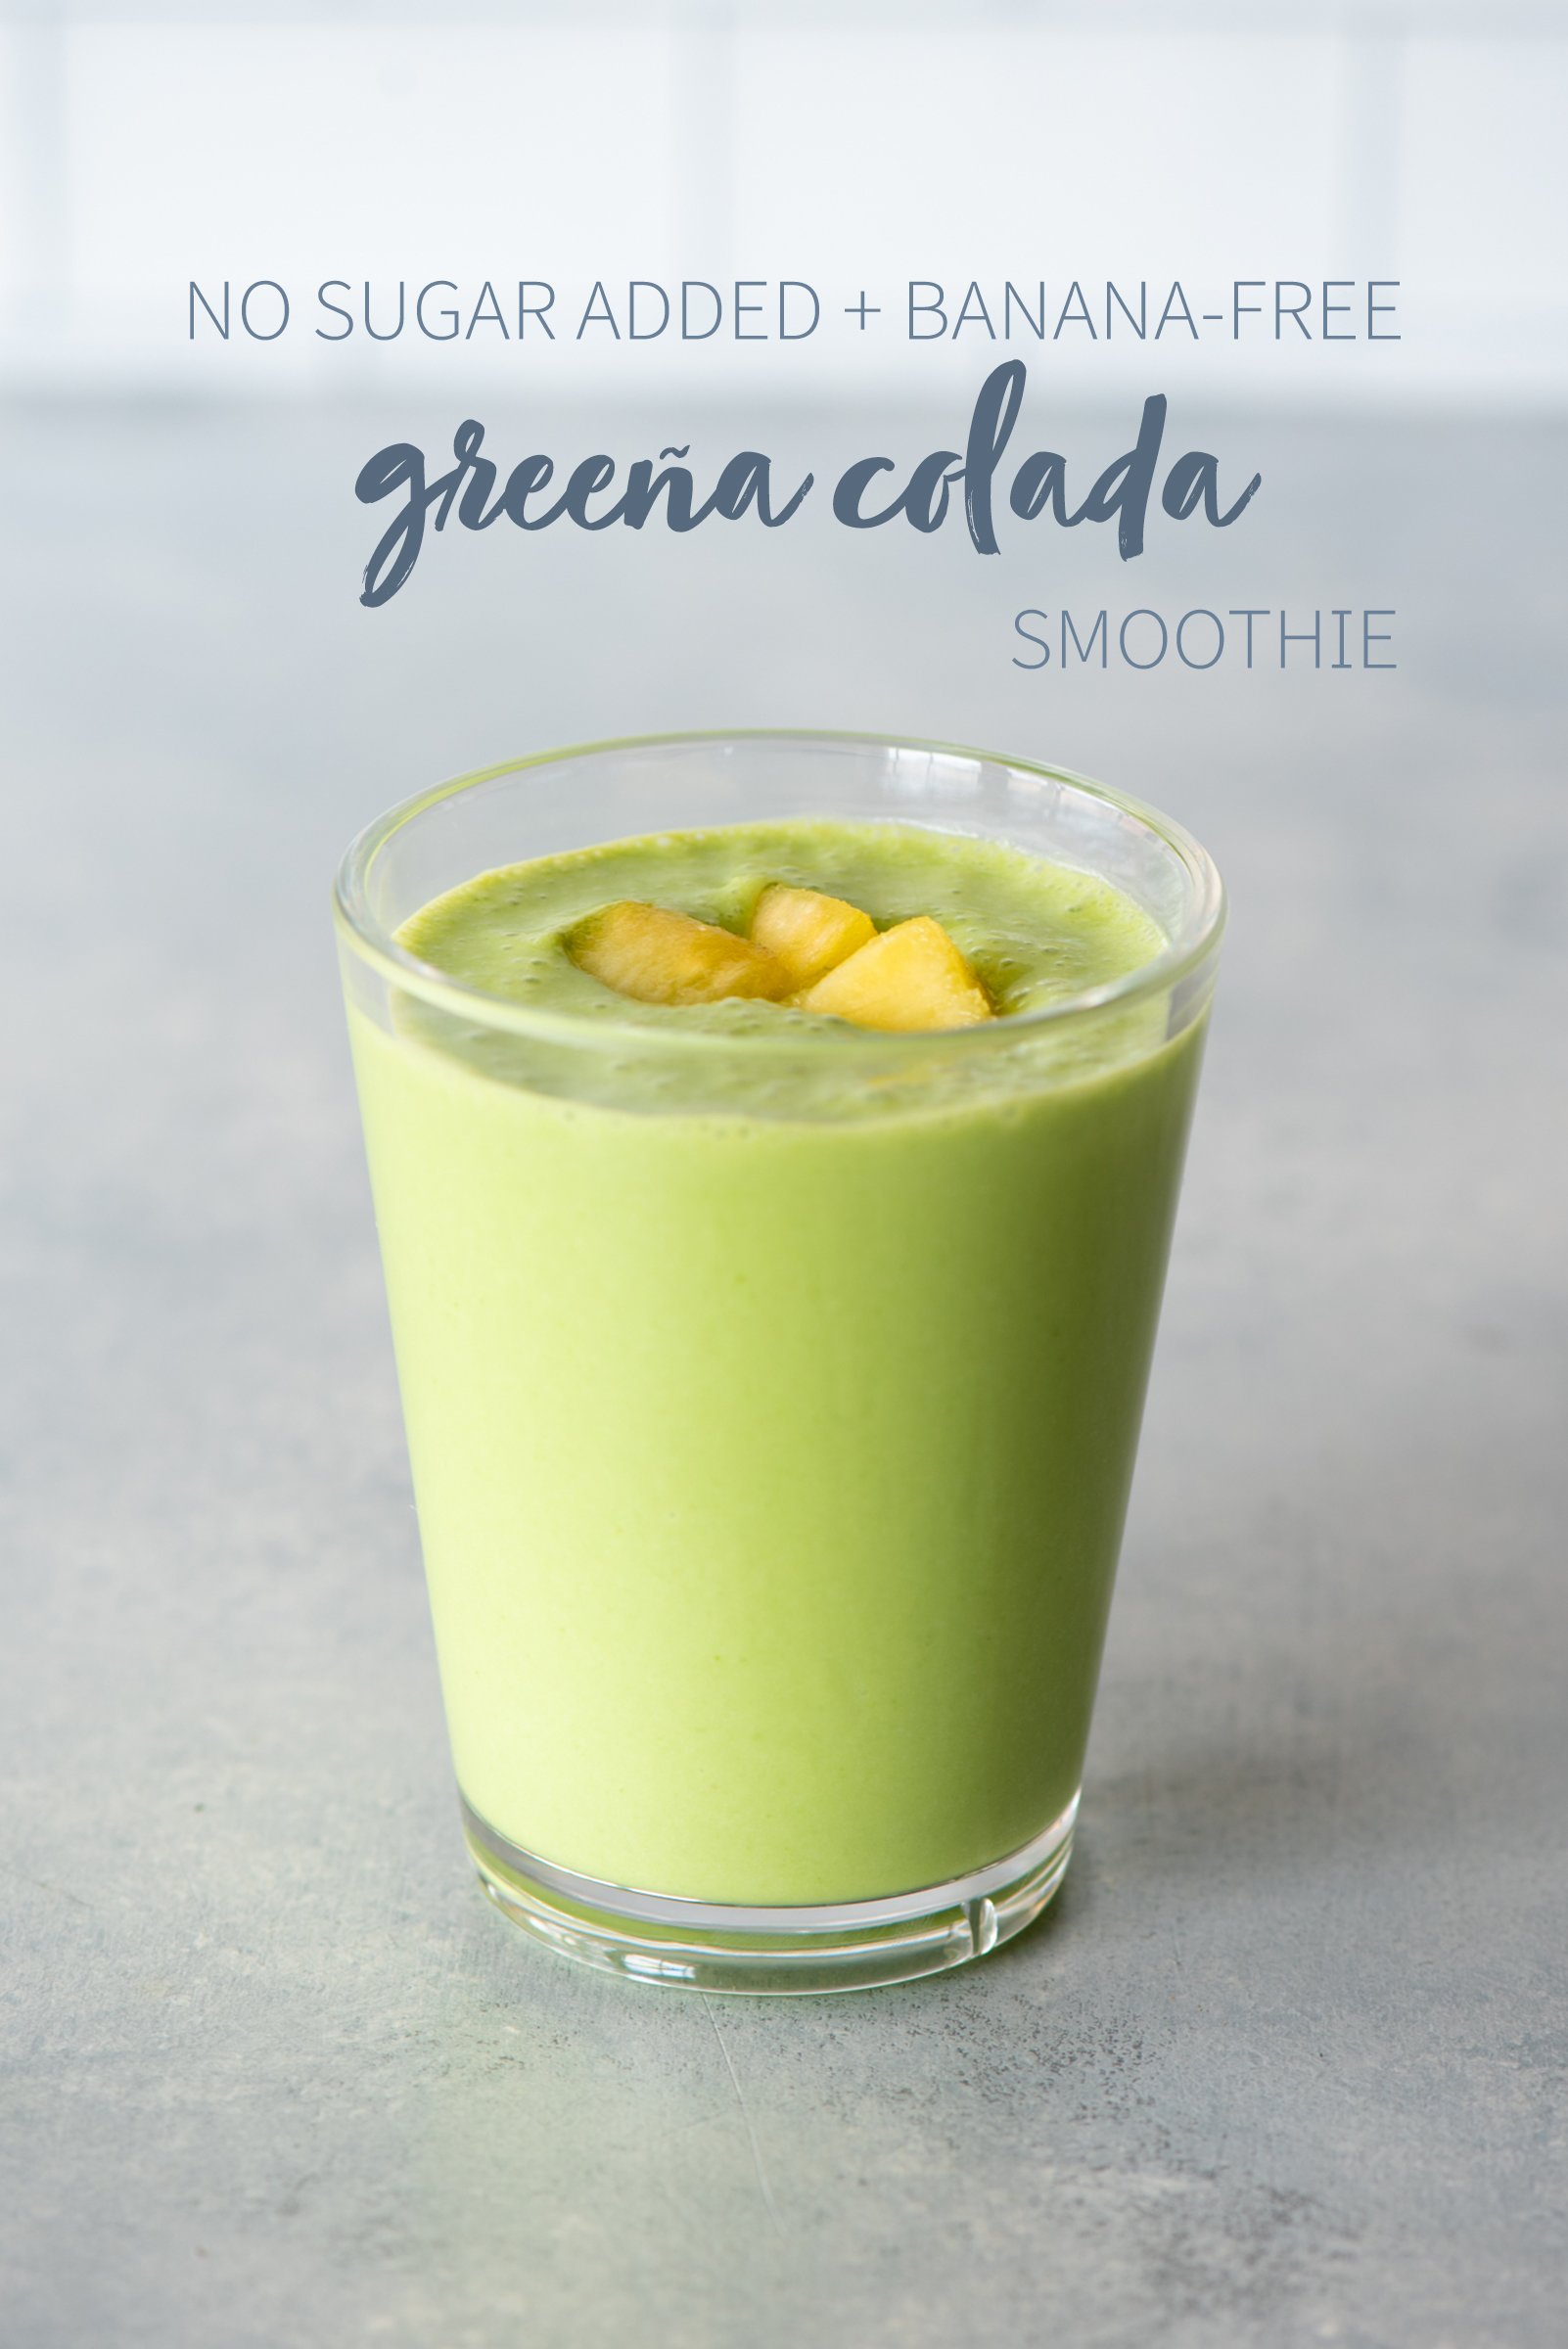 Greena colada smoothie in a clear glass topped with fruit. A text overlay reads "No Sugar Added + Banana-Free Greena Colada Smoothie."